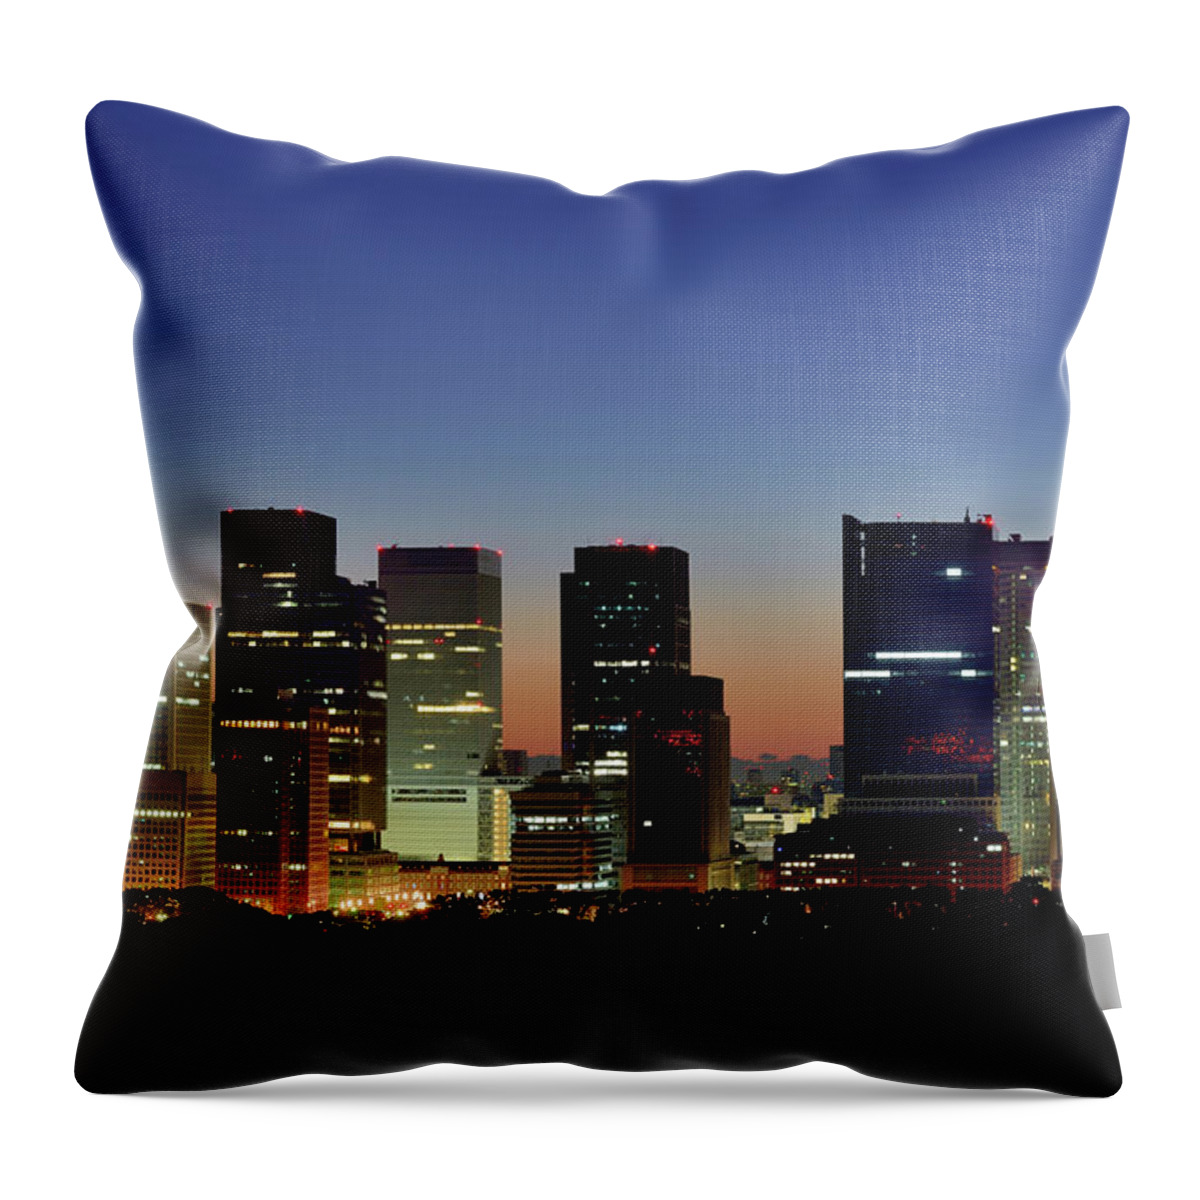 Downtown District Throw Pillow featuring the photograph Tokyo, Skyscrapers Of Marunouchi by Vladimir Zakharov